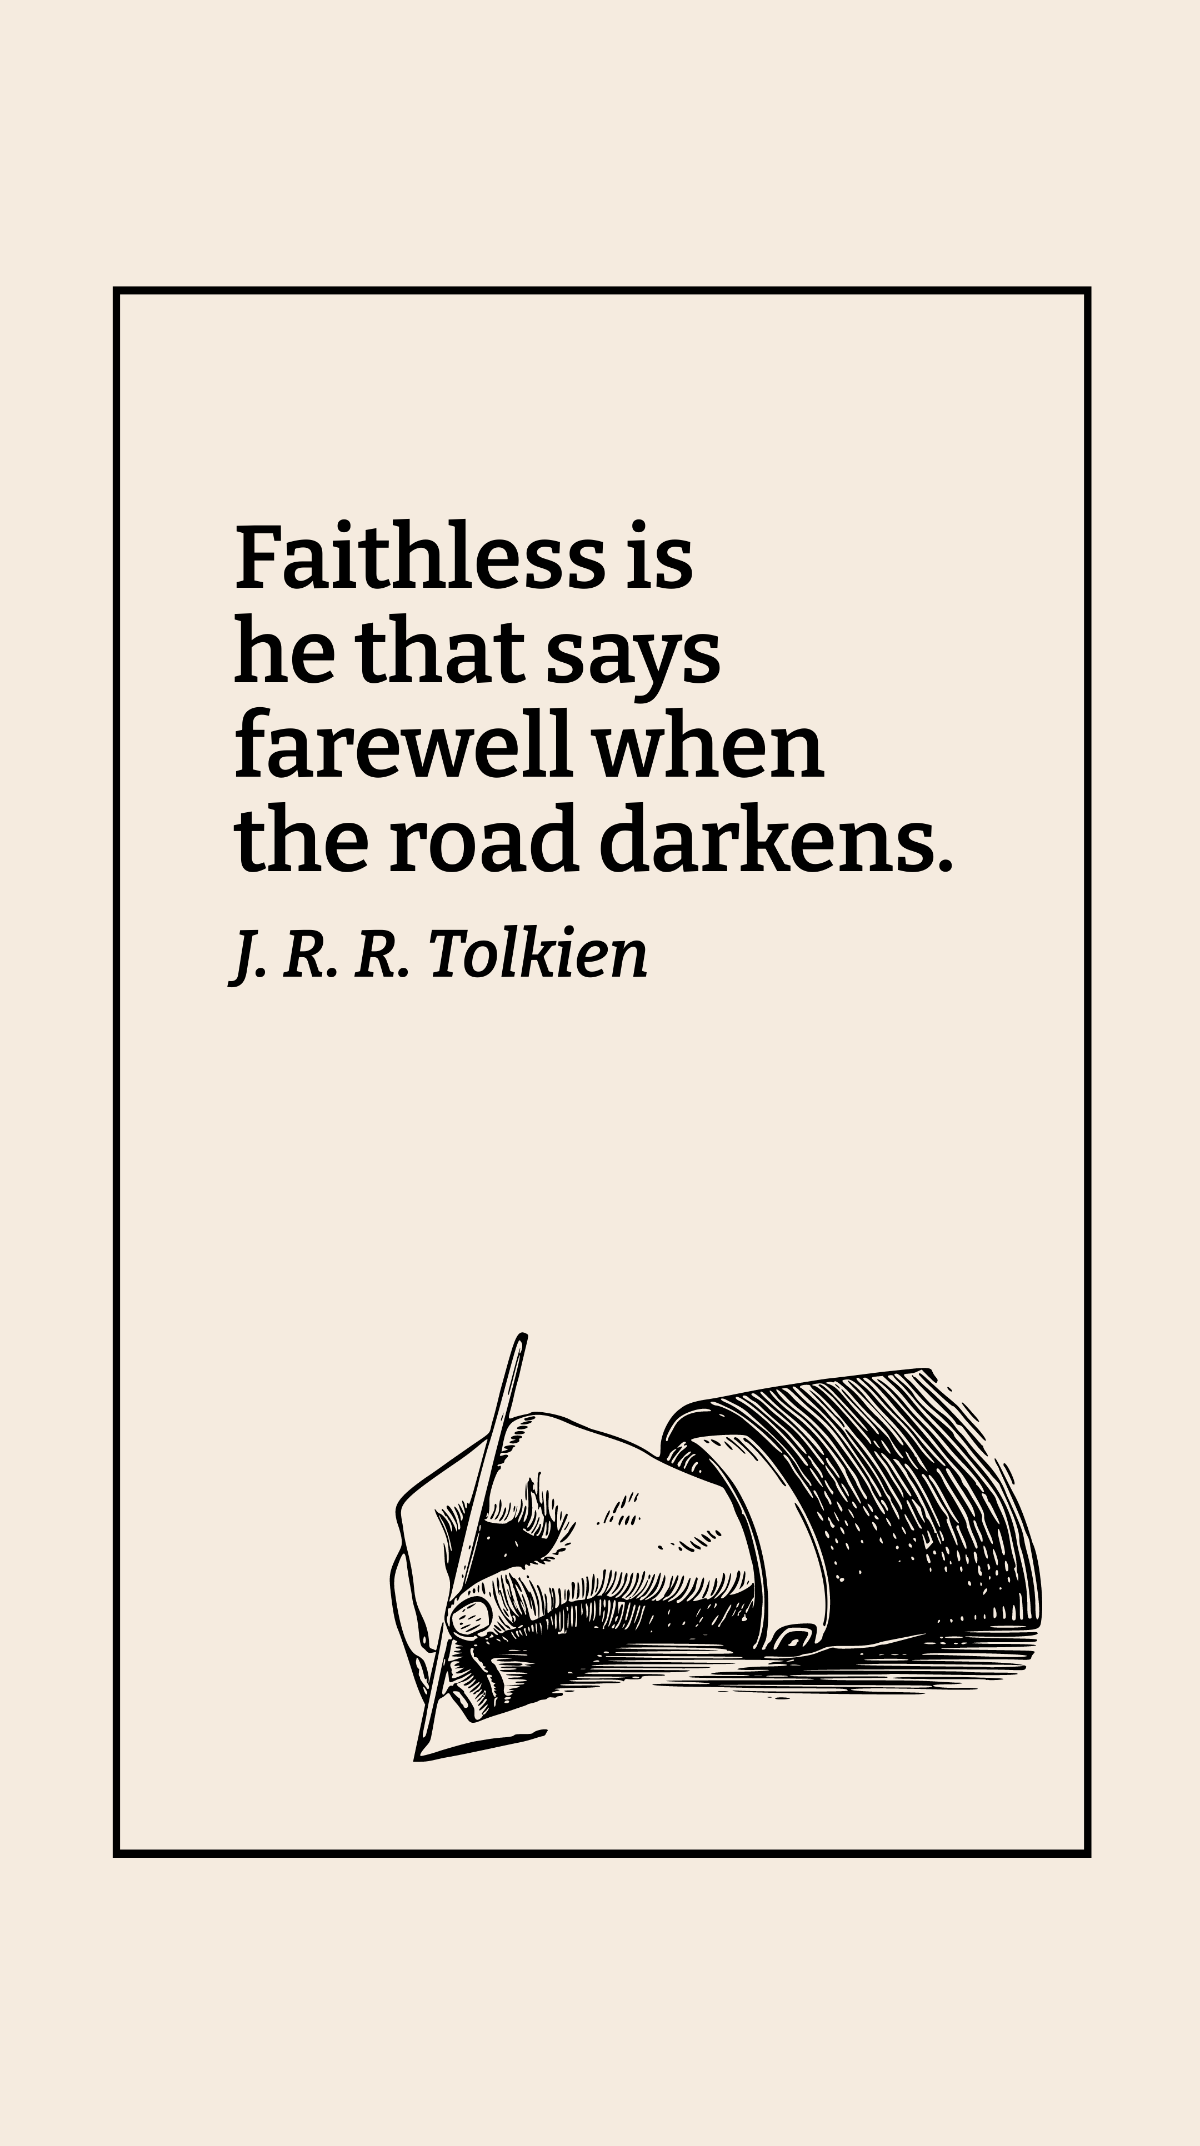 J. R. R. Tolkien - Faithless is he that says farewell when the road darkens. Template